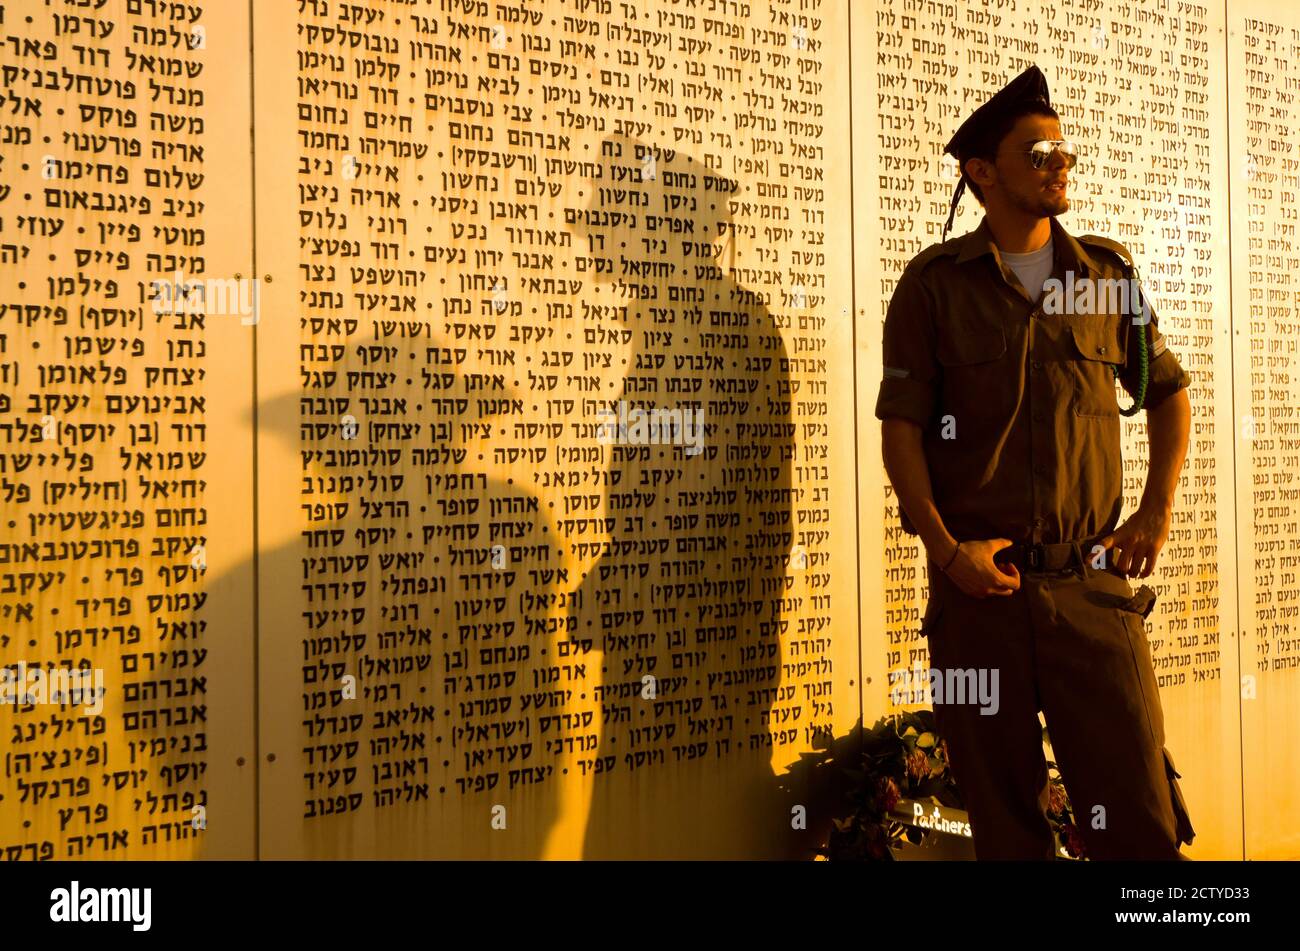 Army soldier standing in front of the Wall of Names memorial to fallen soldiers, Armored Corps Memorial, Latrun, Ayalon Valley, Shephelah, Israel Stock Photo